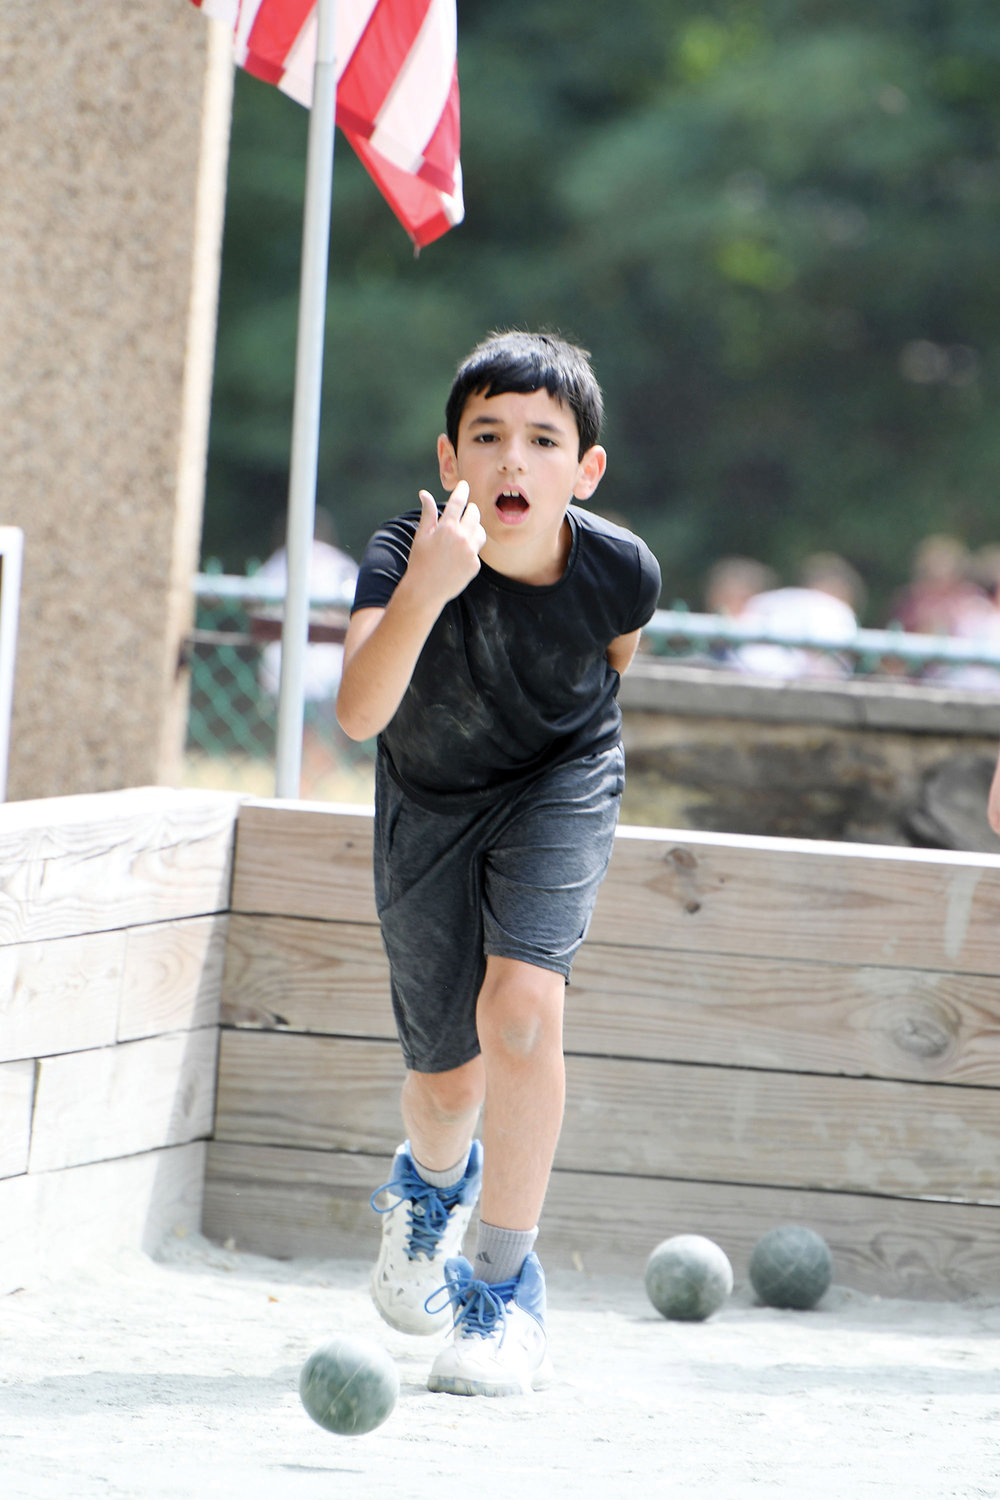 Max Stern, one of the youngest campers, tosses a bocce ball July 15 during competition at the Msgr. Farrell Bocce Summer Camp on Staten Island.